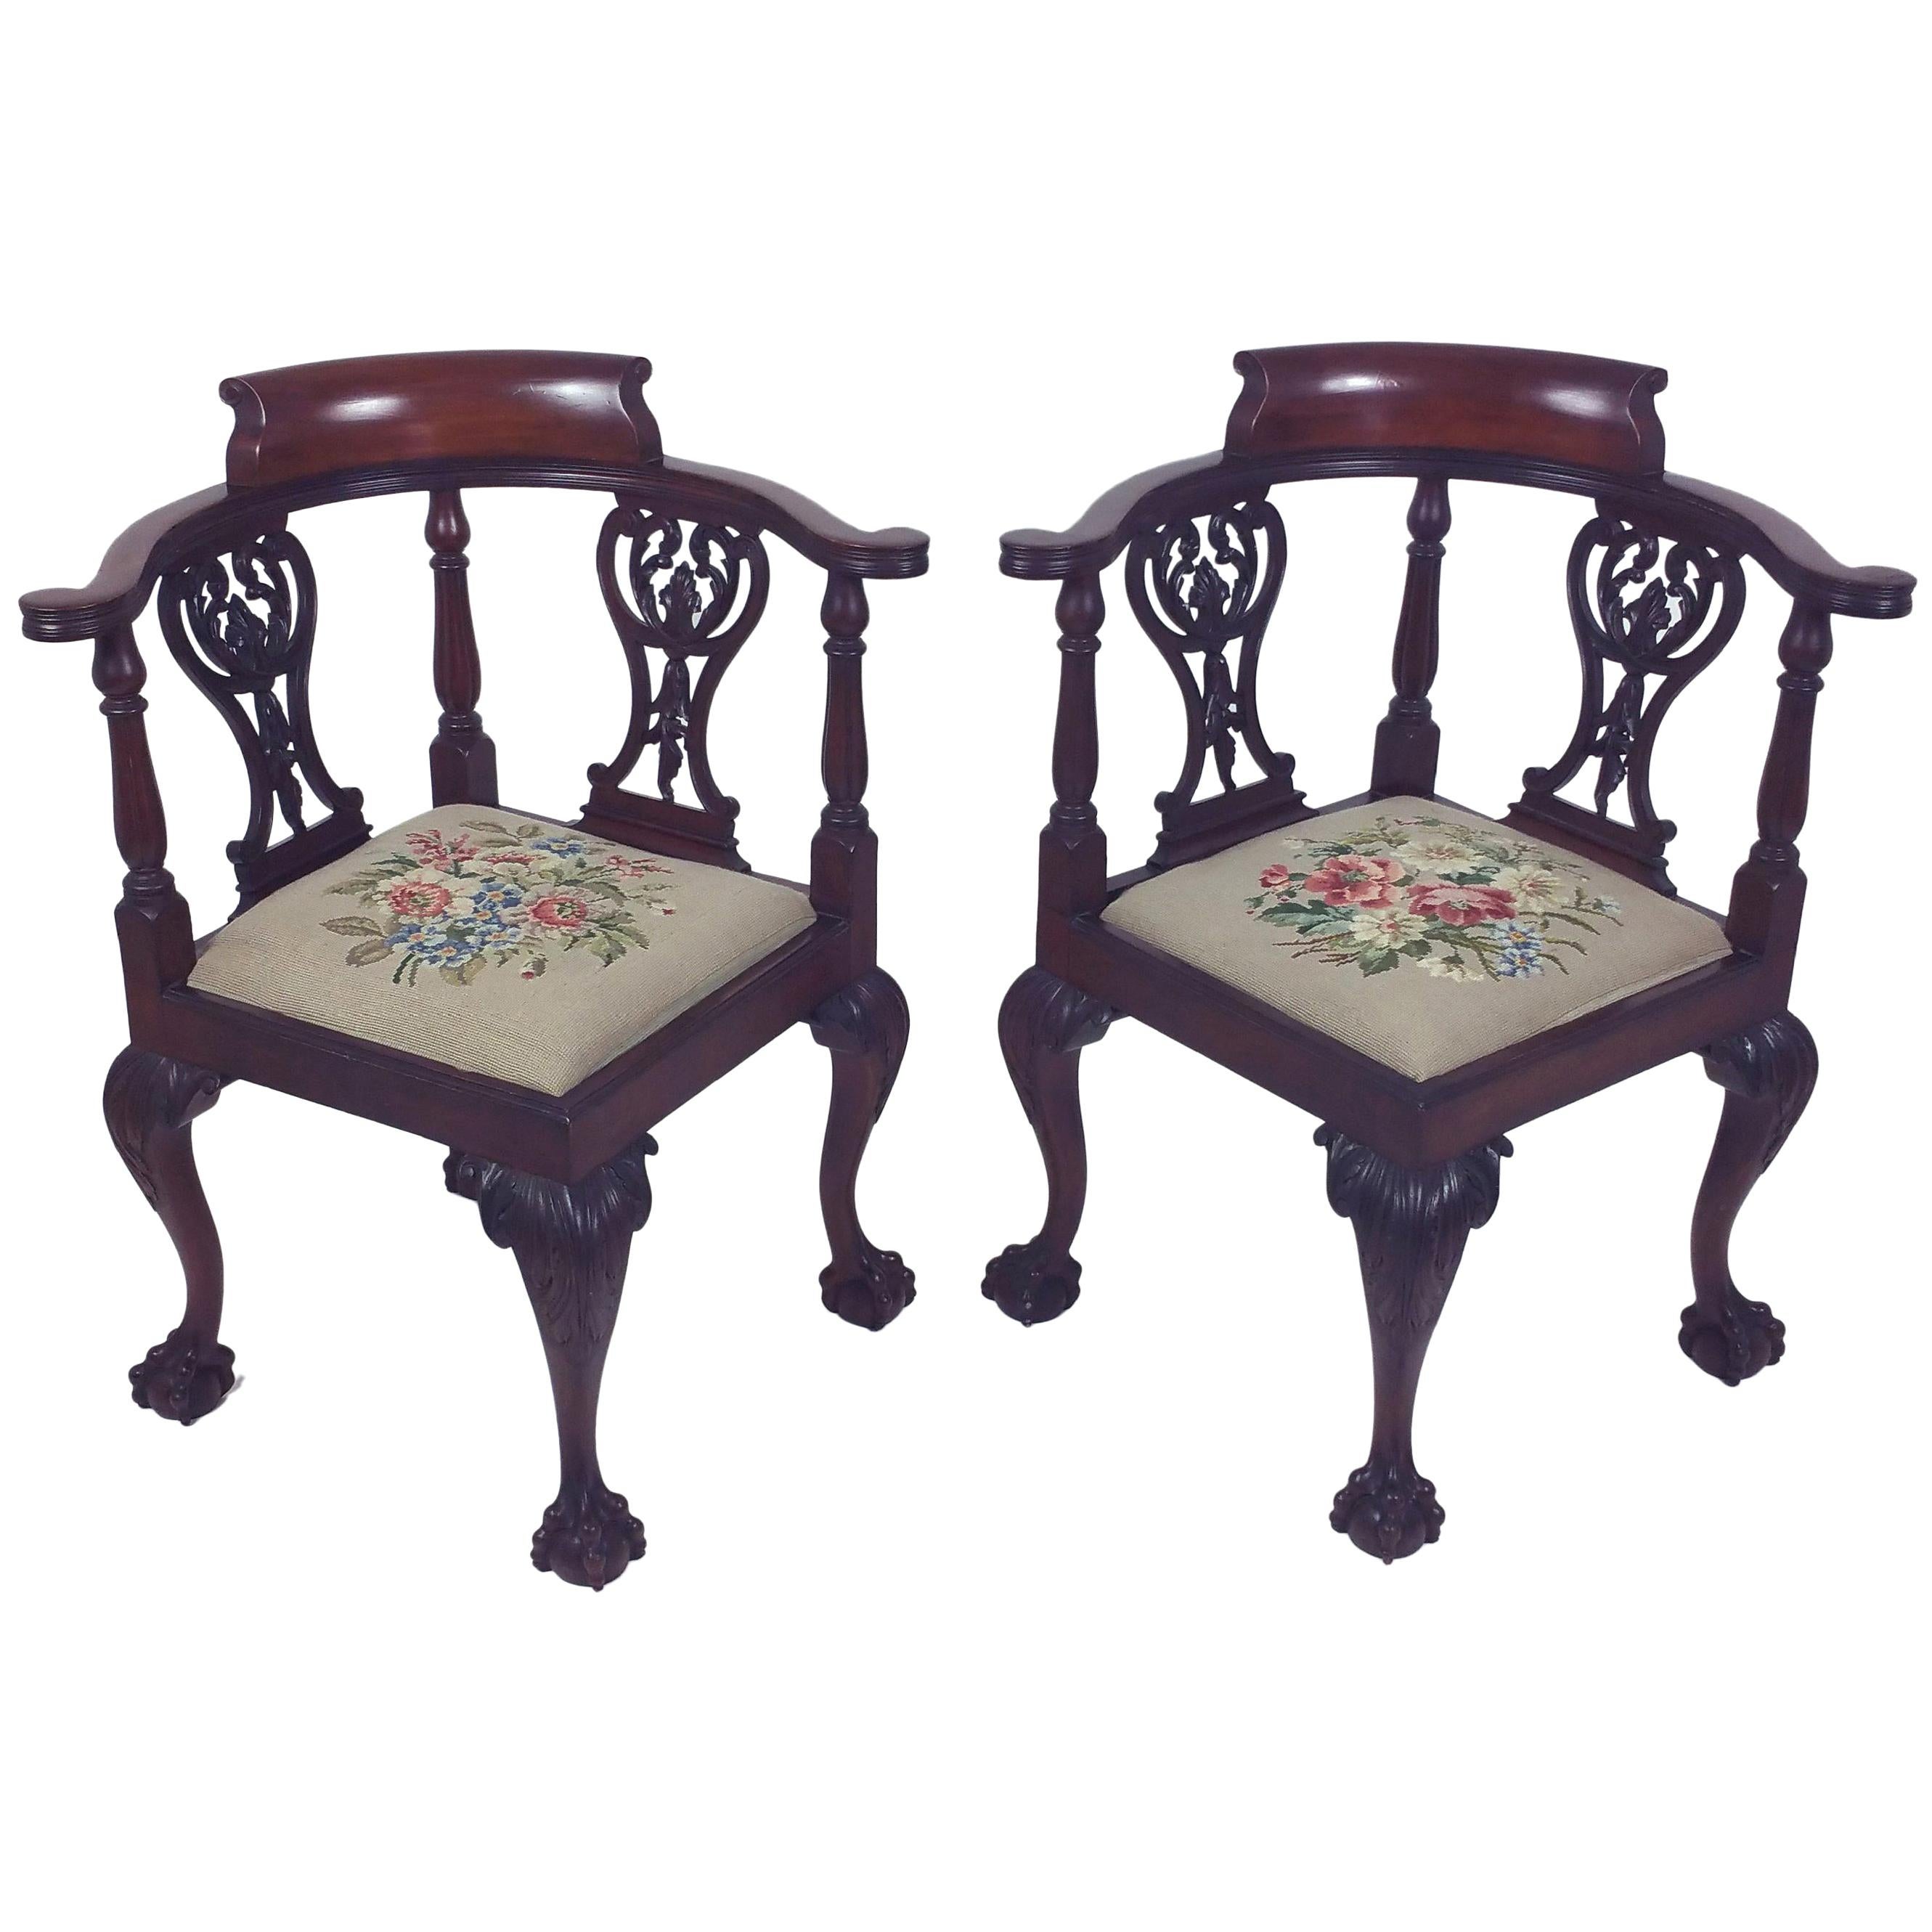 Pair of Late 19th Century Chippendale Design Carved Mahogany Corner Chairs